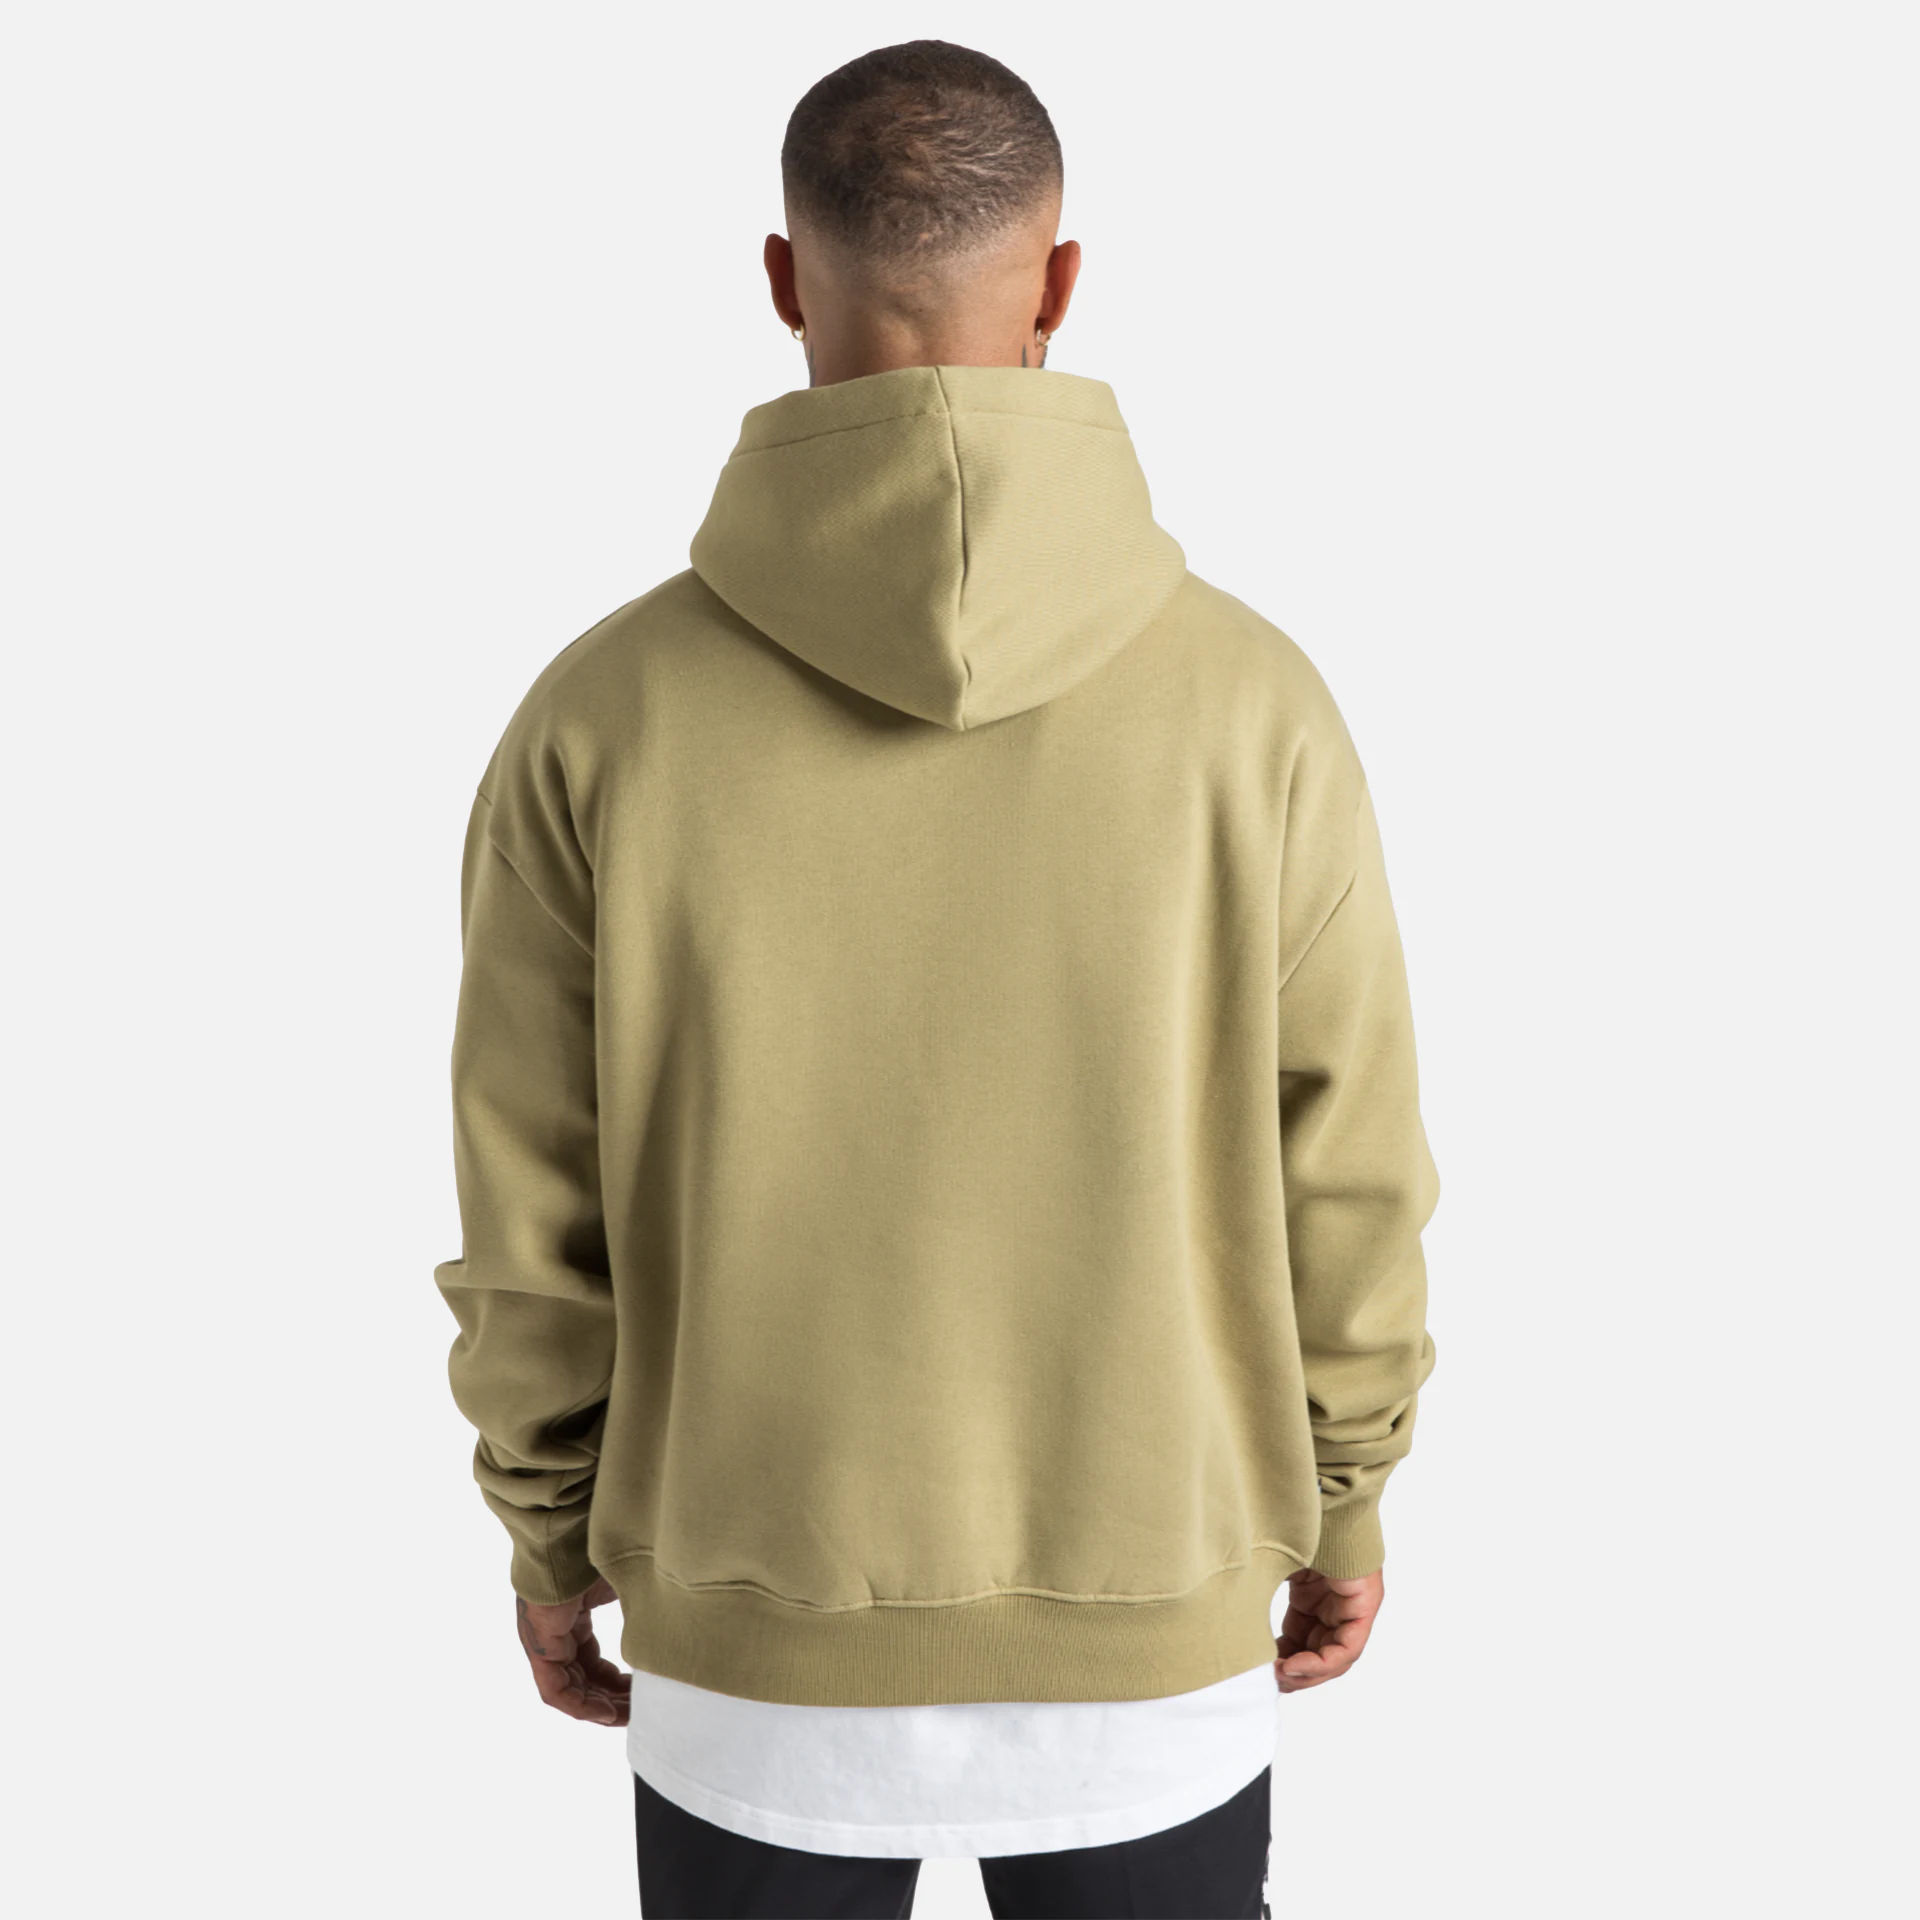 Fast and Bright FAB Hoodie Olive